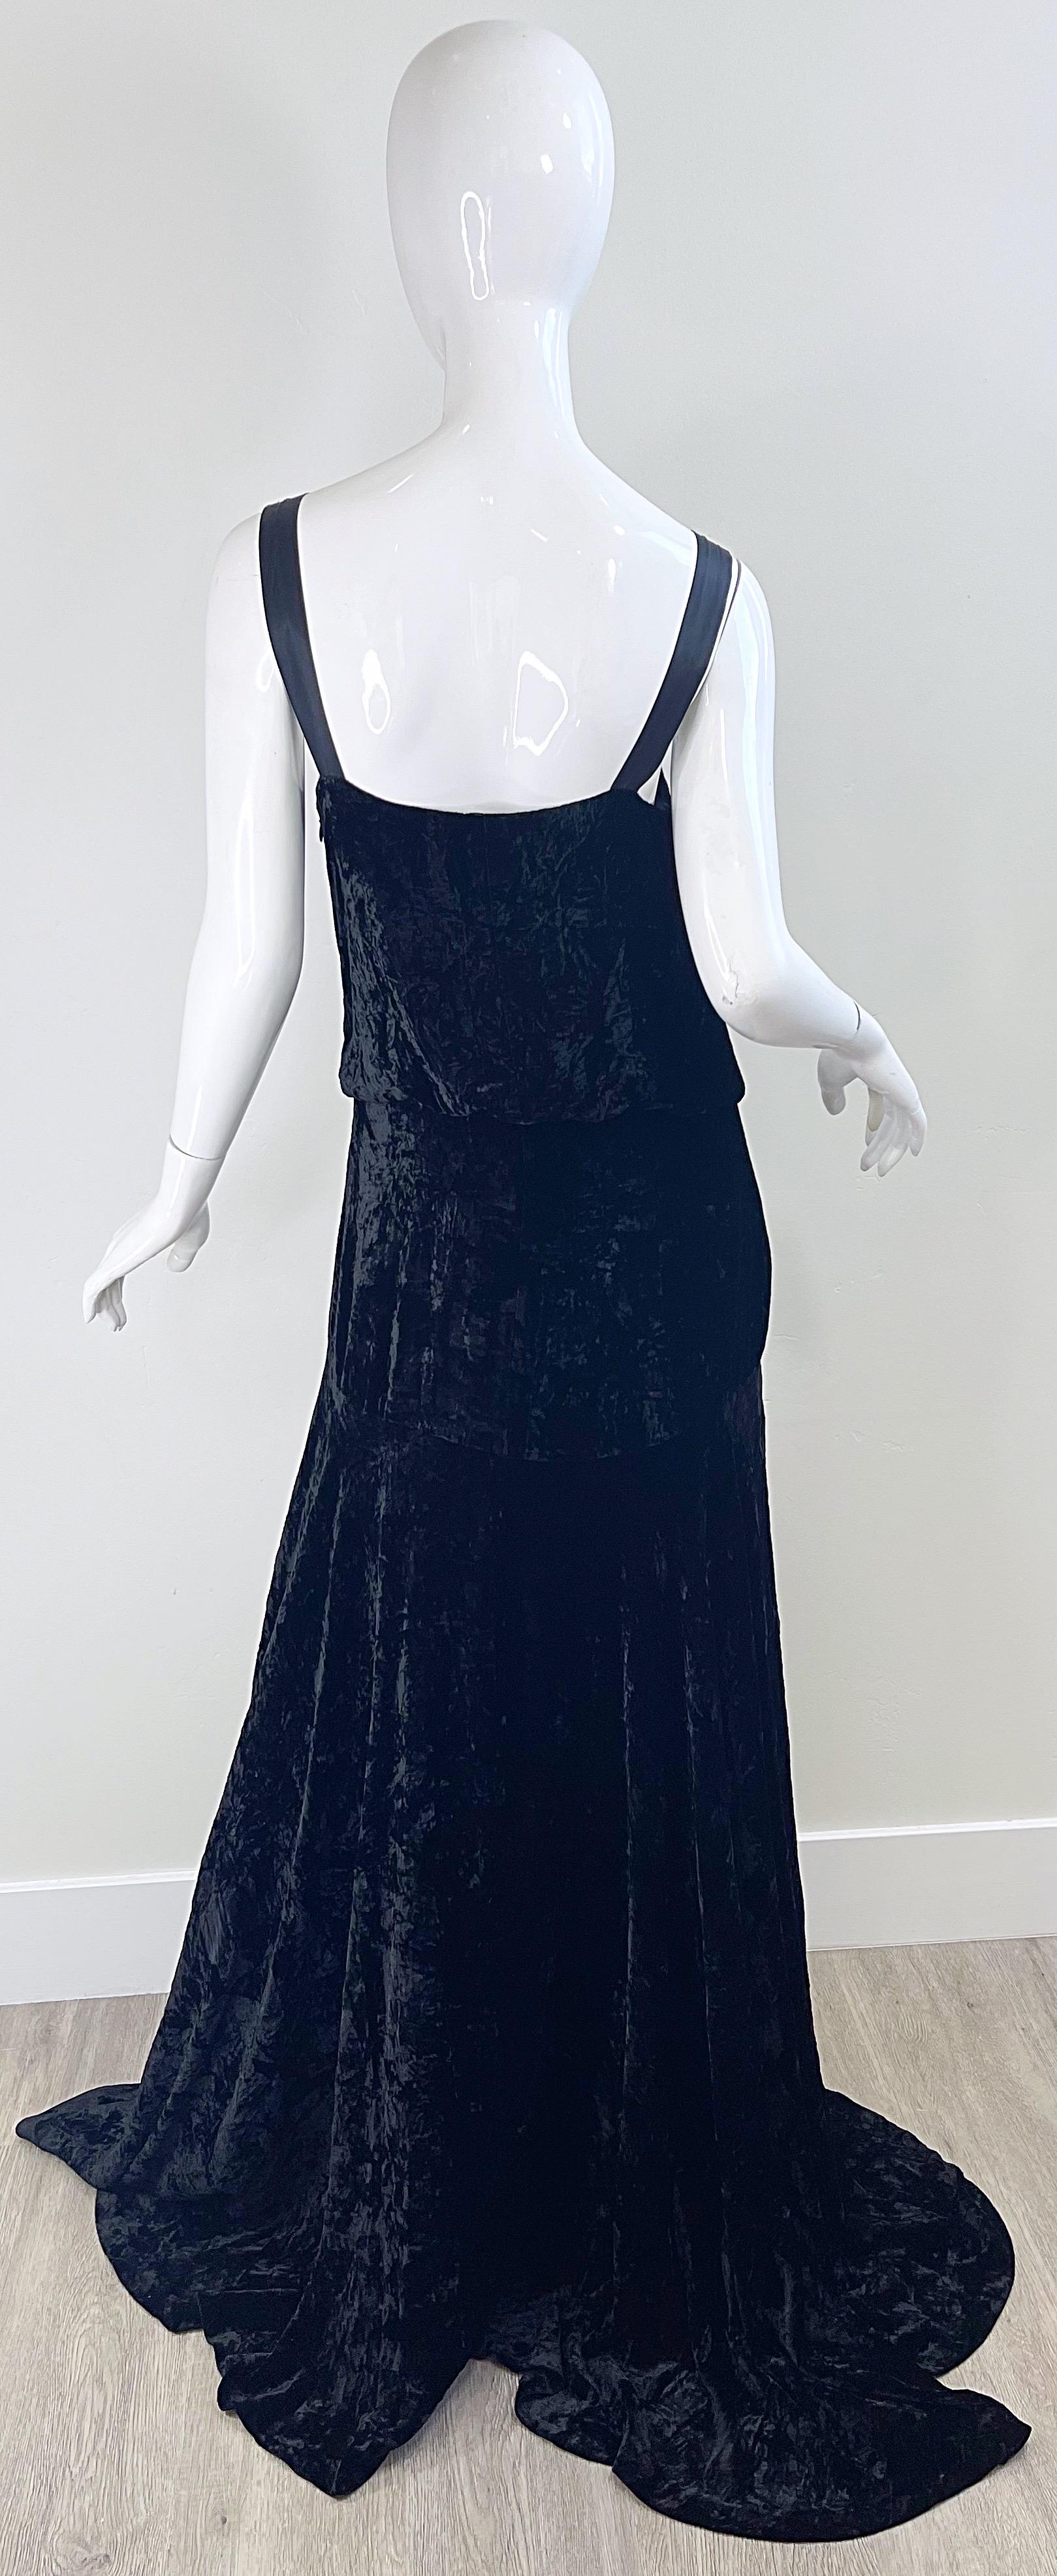 NWT Michael Kors Collection Fall 2006 Runway Size 6-8 Black Crushed Velvet Gown For Sale 6